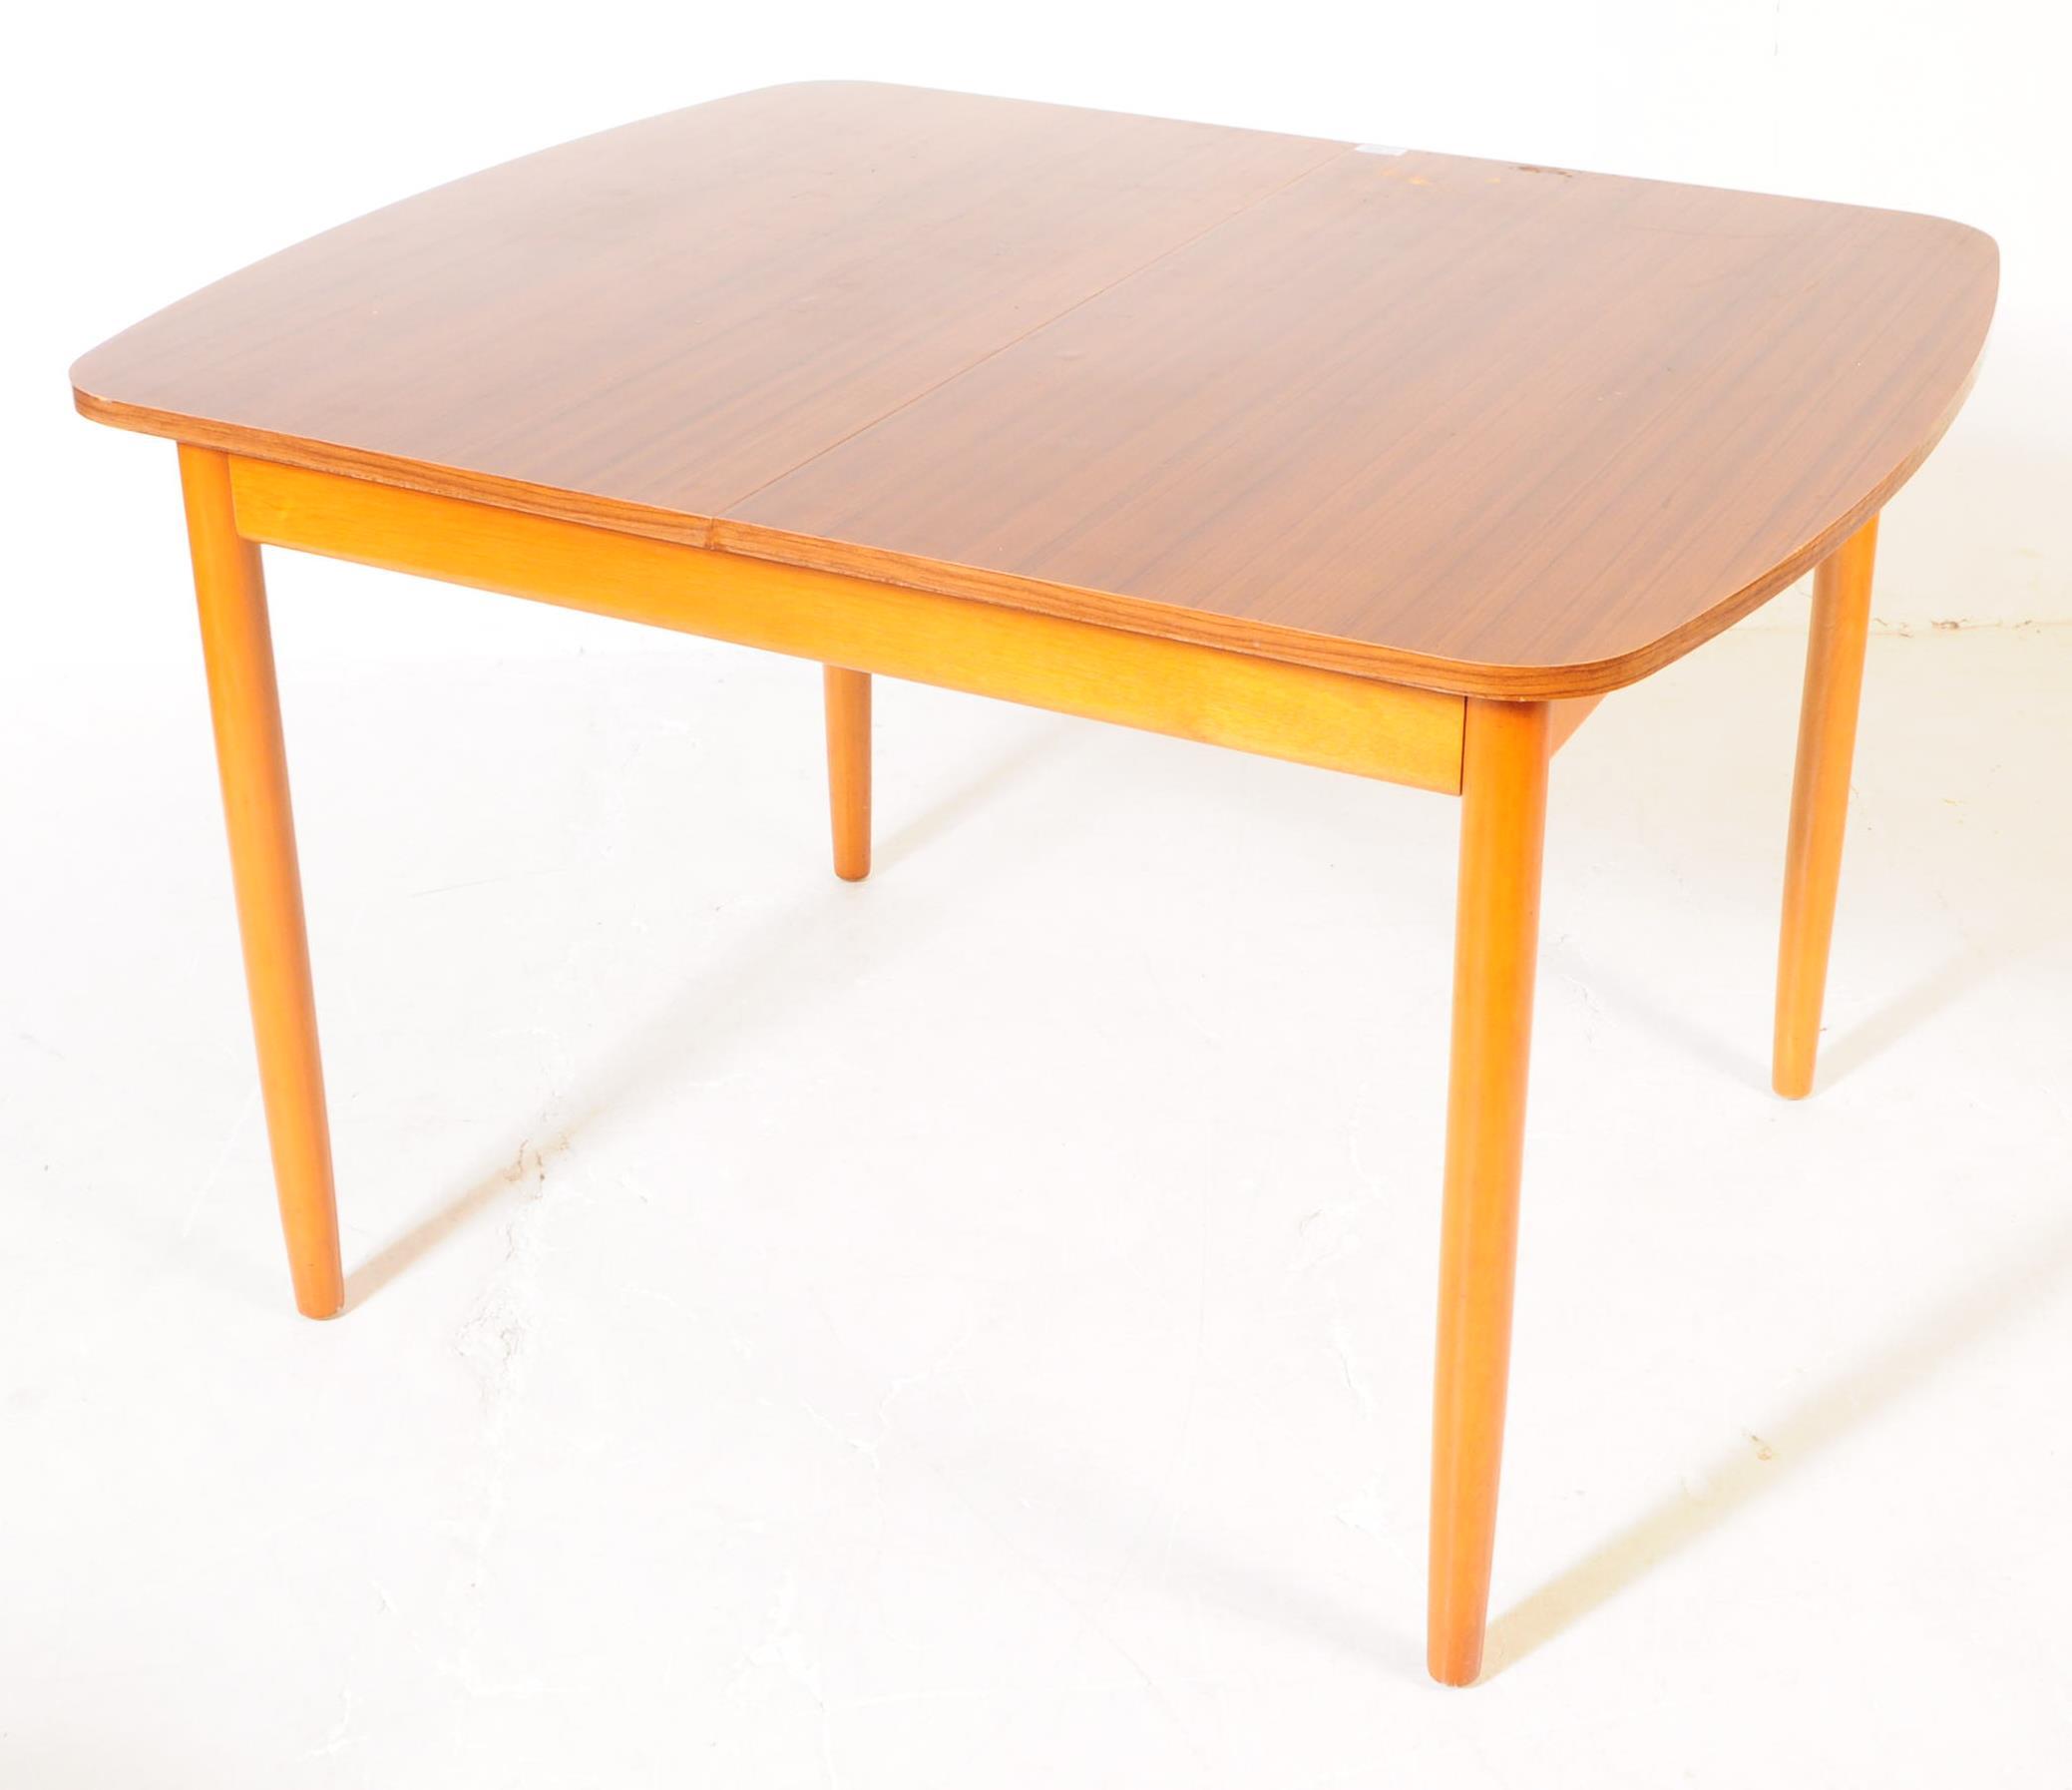 BRITISH MODERN DESIGN - MID CENTURY DINING TABLE & CHAIRS - Image 7 of 7